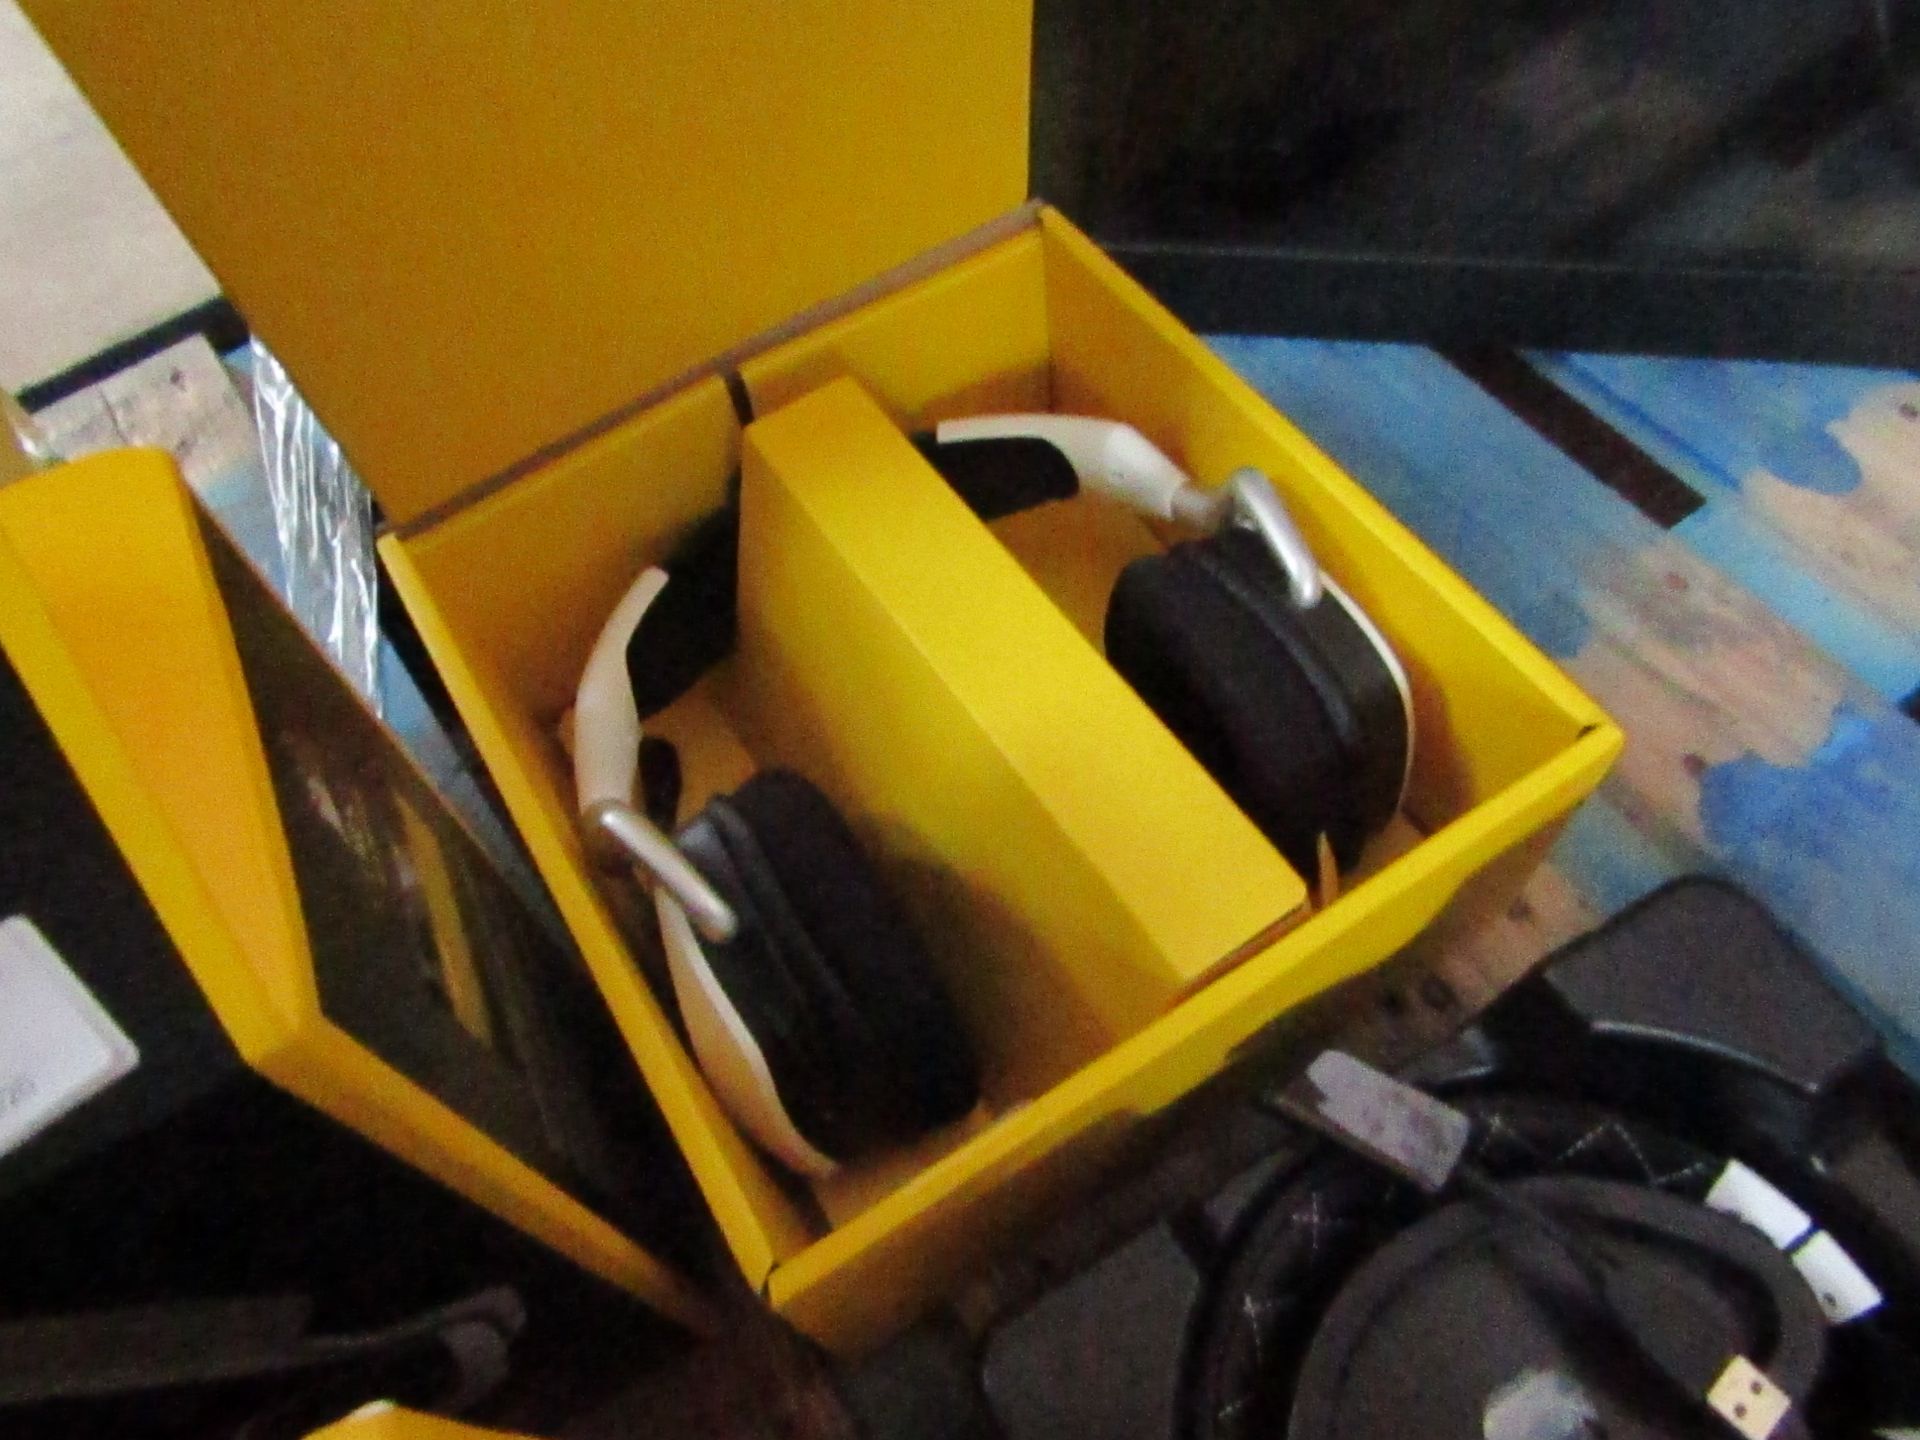 Corsair Void Pro RGB gaming headphones, tested working and boxed.